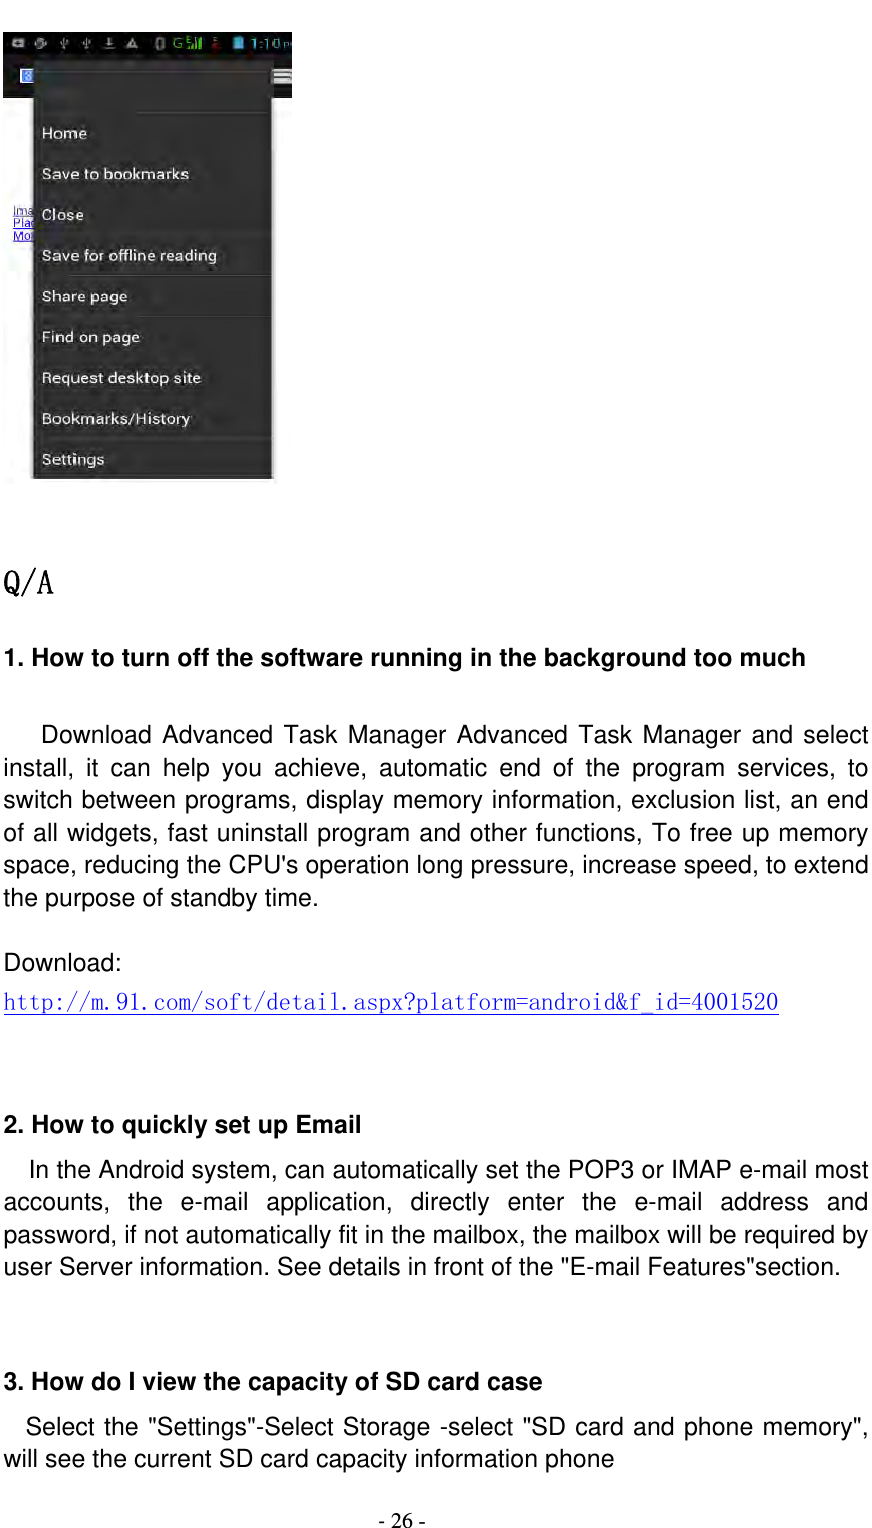                                          ‐ 26 -   Q/A 1. How to turn off the software running in the background too much     Download Advanced Task Manager Advanced Task Manager and select install, it can help you achieve, automatic end of the program services, to switch between programs, display memory information, exclusion list, an end of all widgets, fast uninstall program and other functions, To free up memory space, reducing the CPU&apos;s operation long pressure, increase speed, to extend the purpose of standby time.  Download: http://m.91.com/soft/detail.aspx?platform=android&amp;f_id=4001520   2. How to quickly set up Email   In the Android system, can automatically set the POP3 or IMAP e-mail most accounts, the e-mail application, directly enter the e-mail address and password, if not automatically fit in the mailbox, the mailbox will be required by user Server information. See details in front of the &quot;E-mail Features&quot;section.   3. How do I view the capacity of SD card case   Select the &quot;Settings&quot;-Select Storage -select &quot;SD card and phone memory&quot;, will see the current SD card capacity information phone 